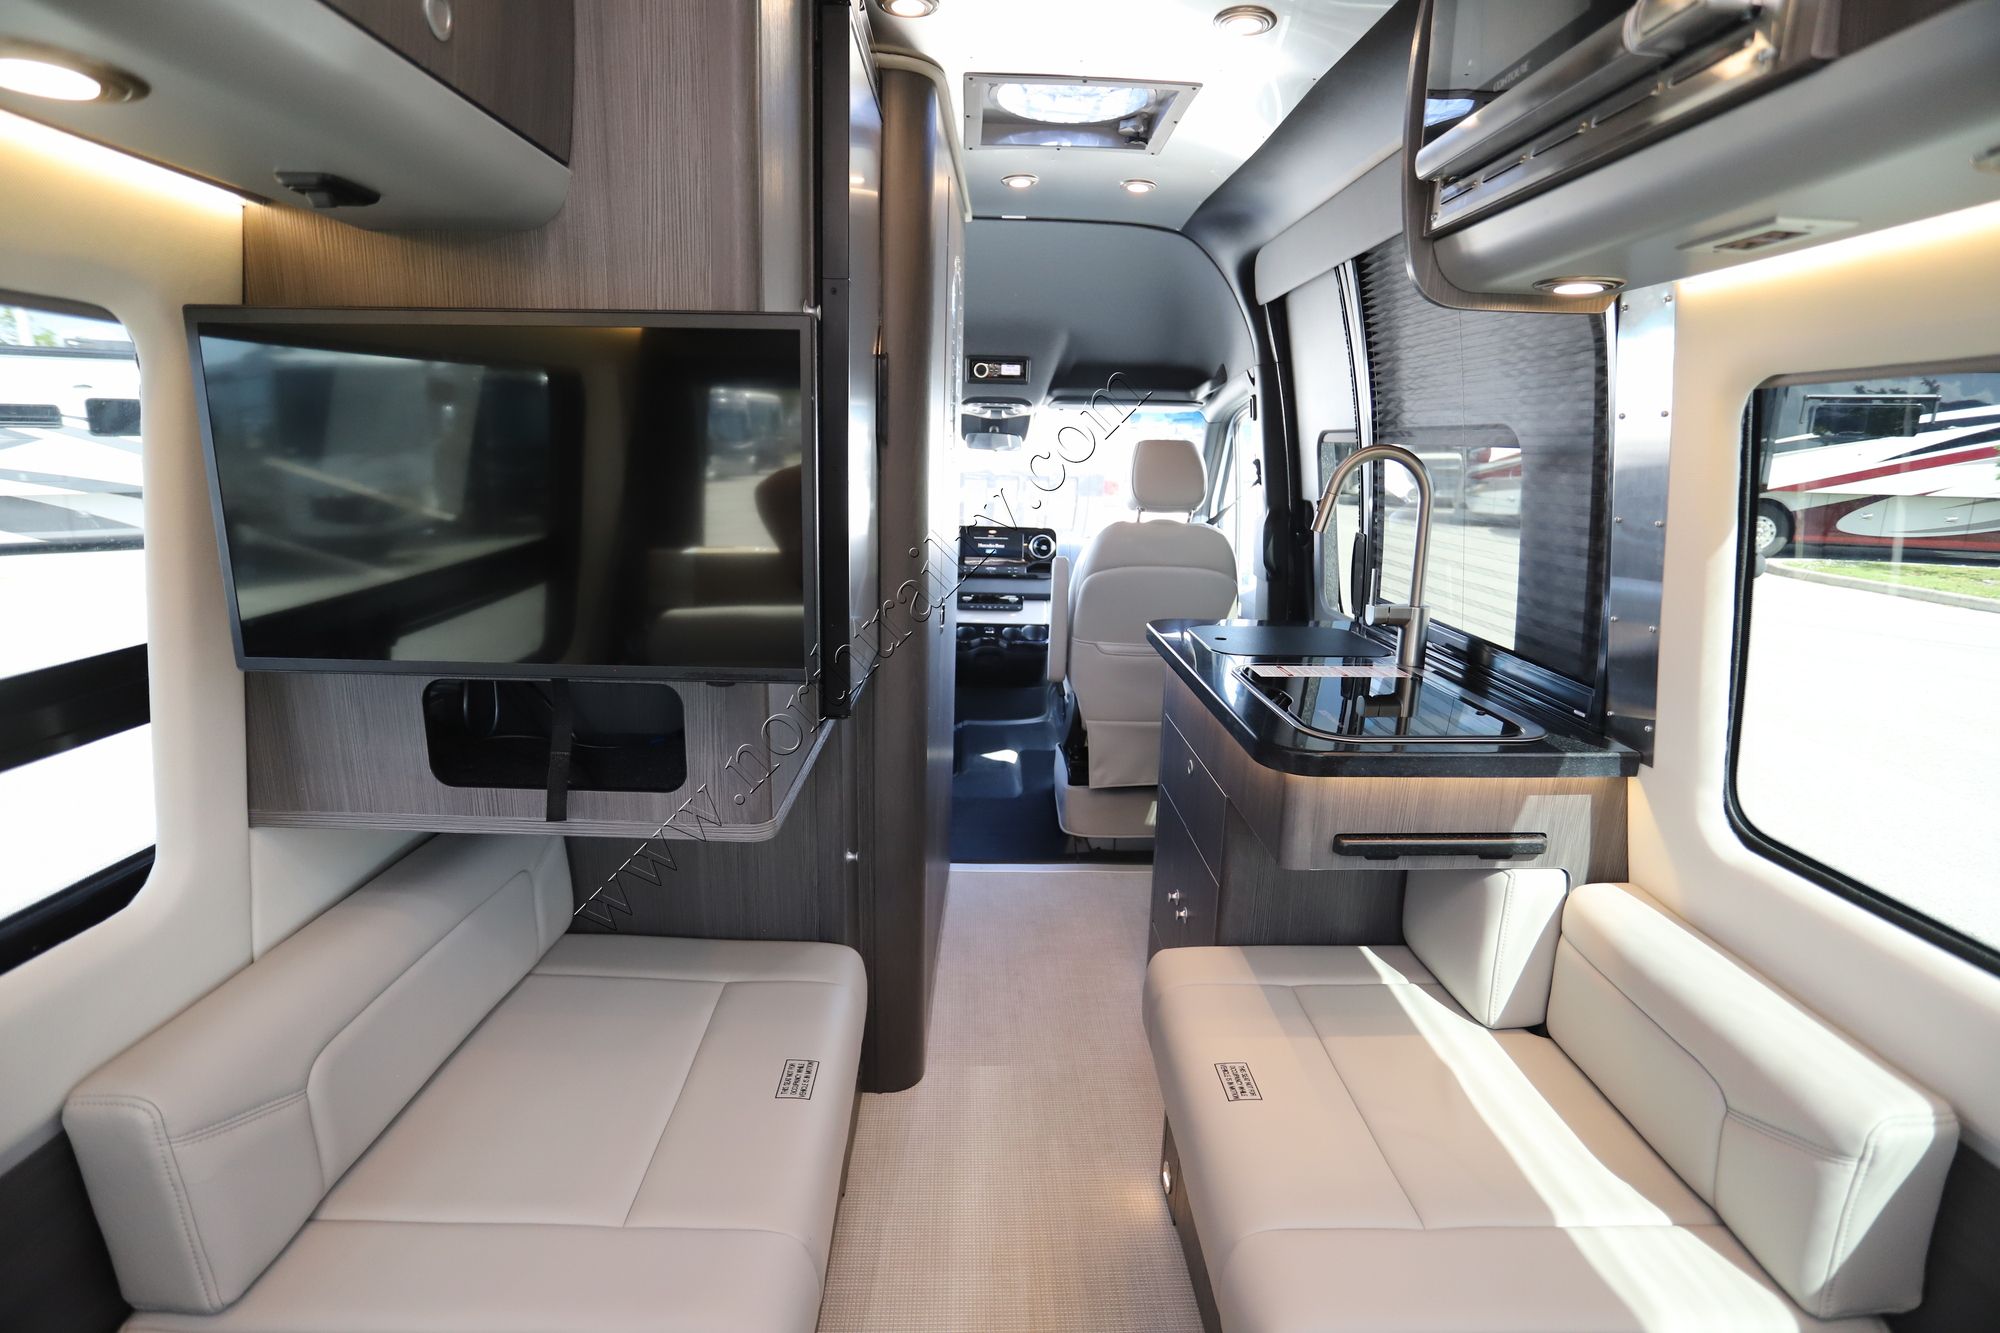 New 2023 Airstream Interstate 19 Class B  For Sale